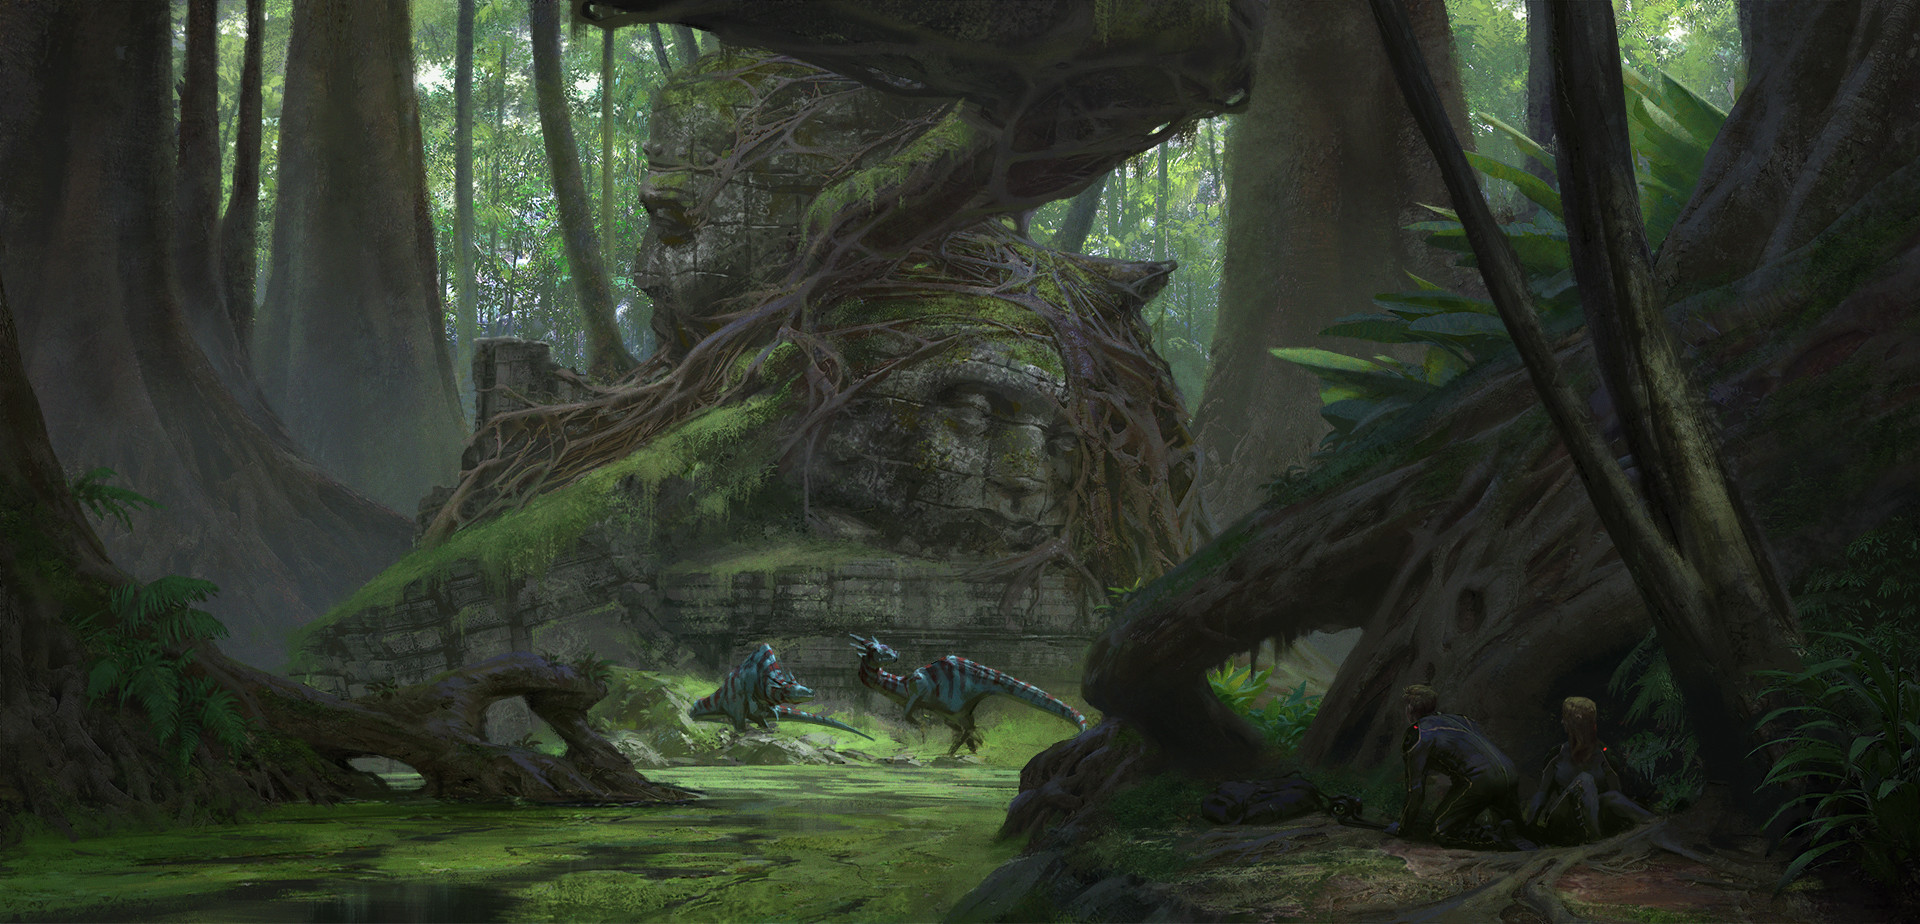 Unexpected Meeting by Klaus Pillon